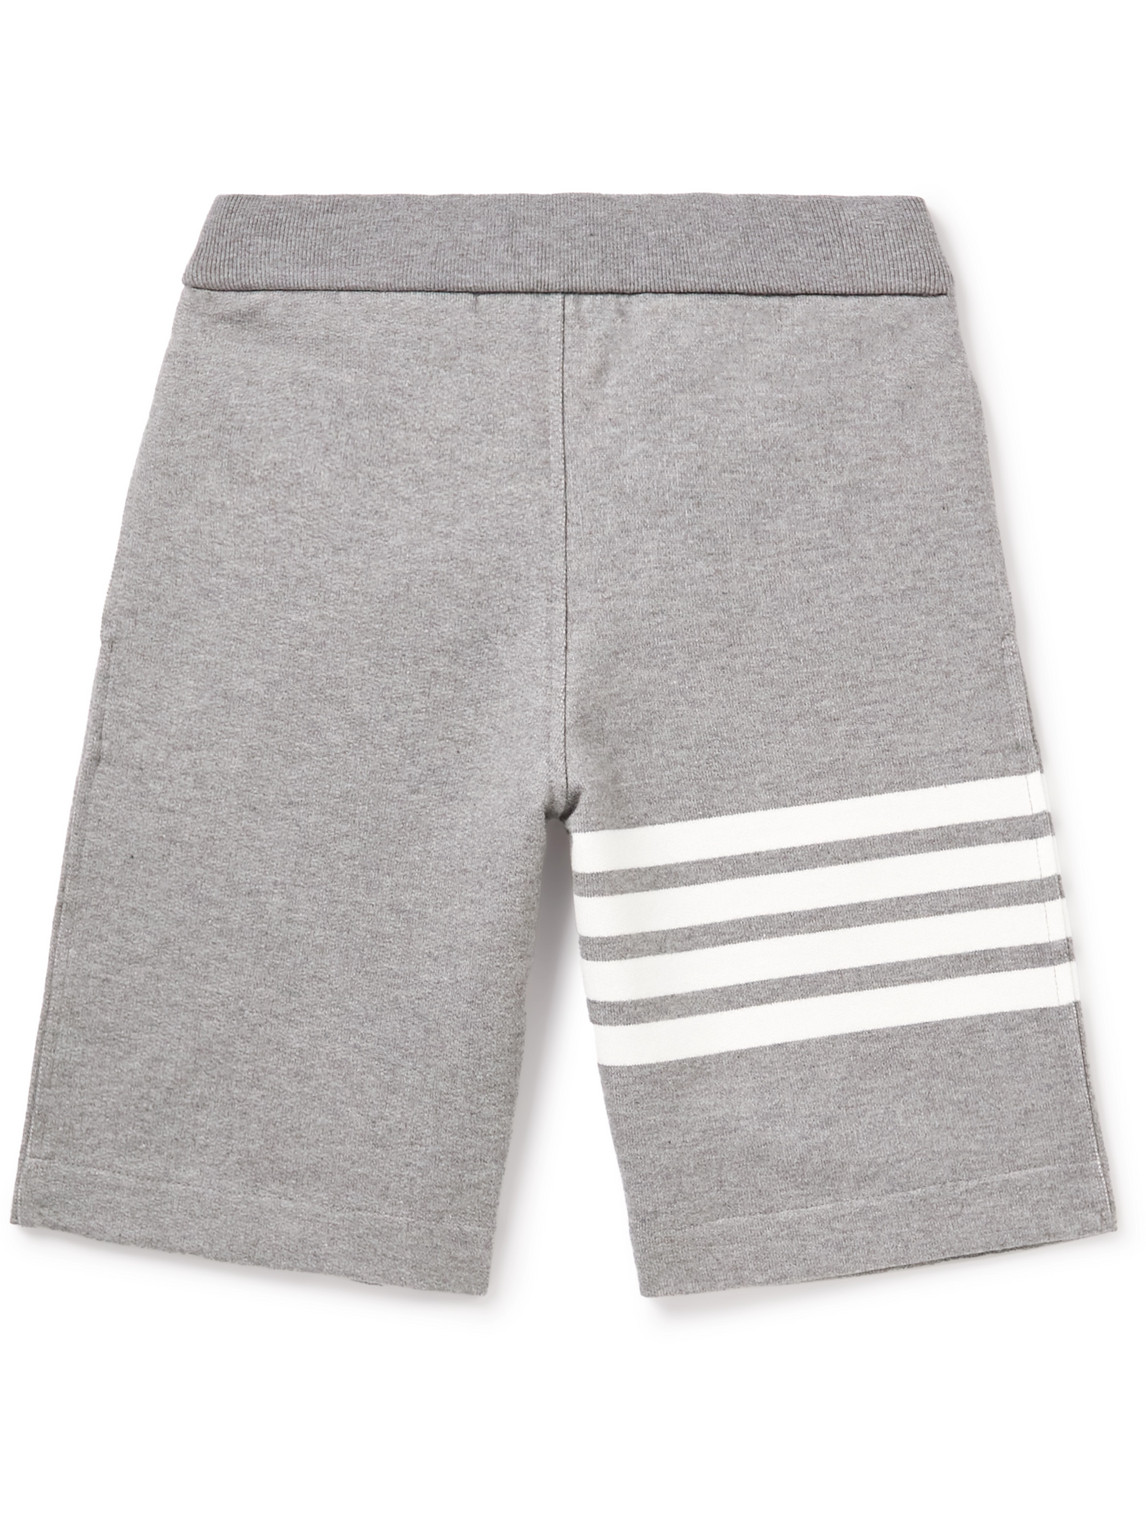 THOM BROWNE STRIPED COTTON-JERSEY SHORTS